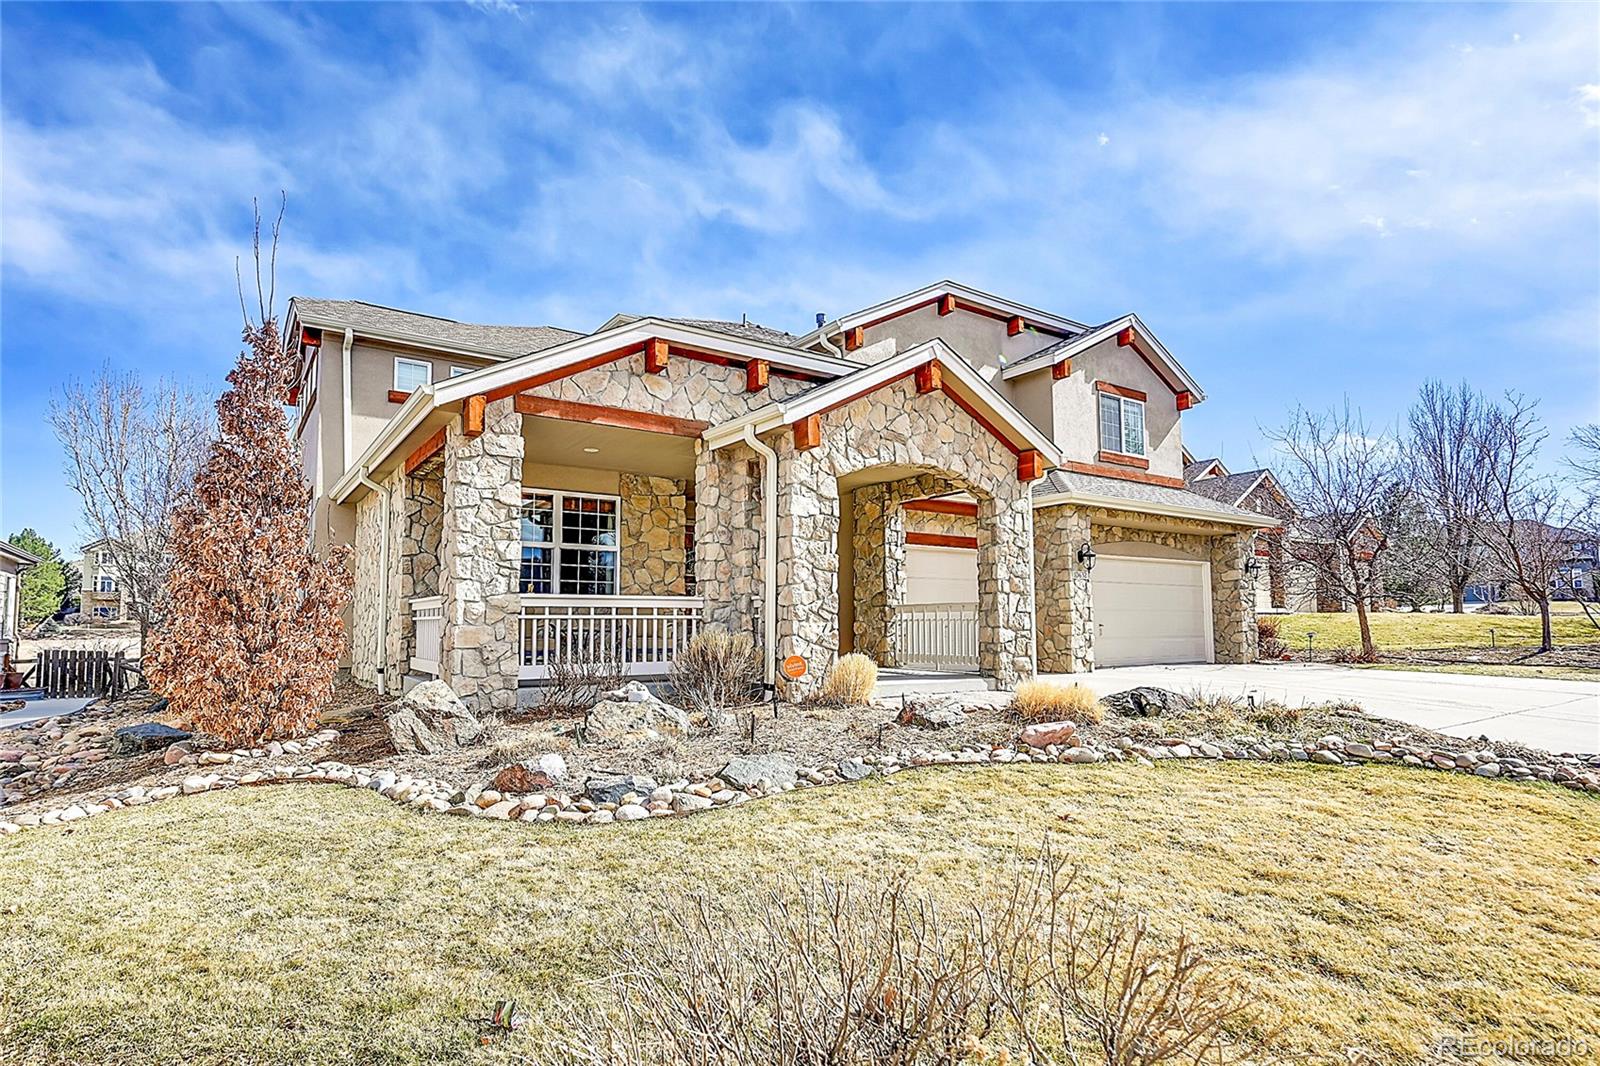 Report Image for 10632  Wolff Way,Westminster, Colorado